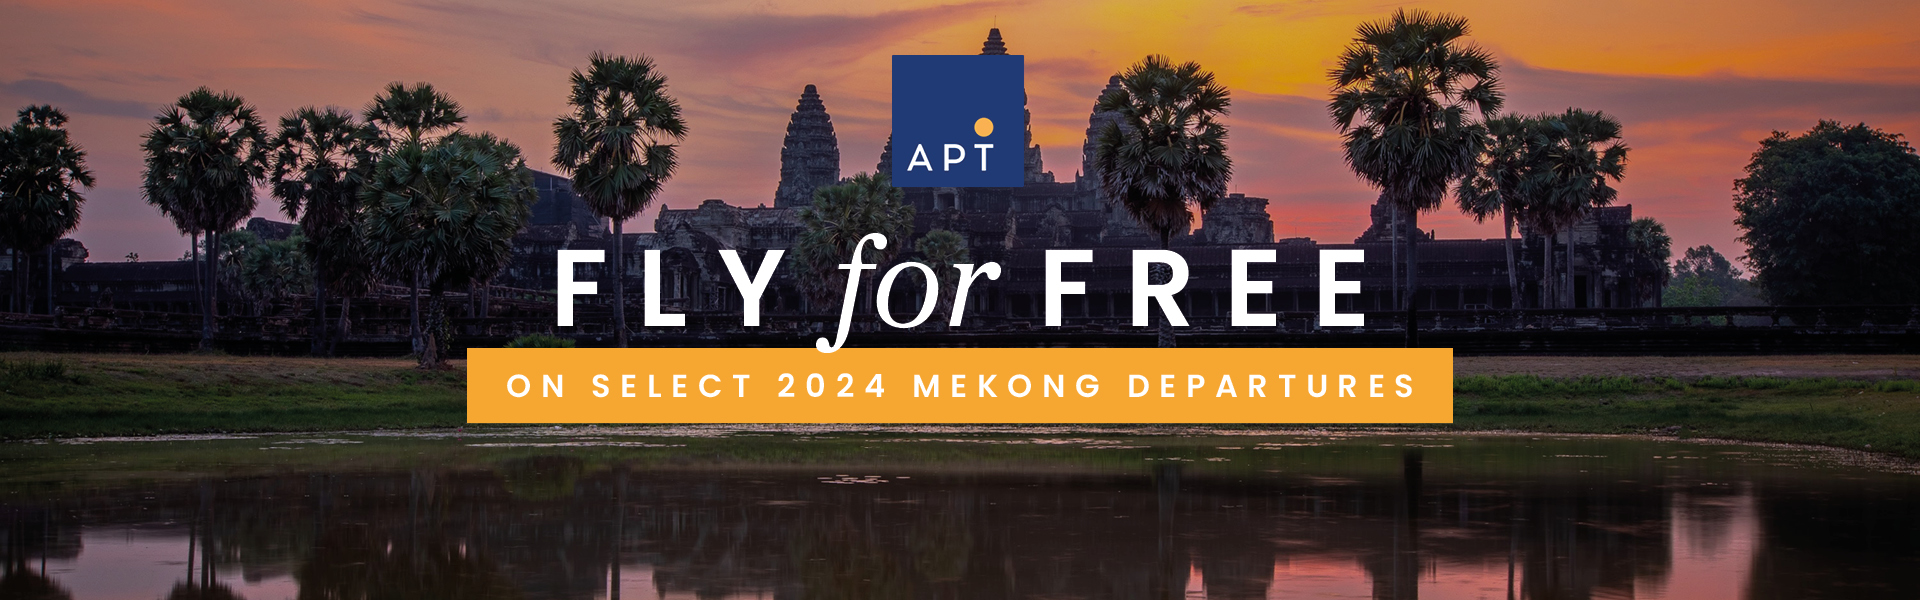 APT Luxury River Cruises - Fly For Free